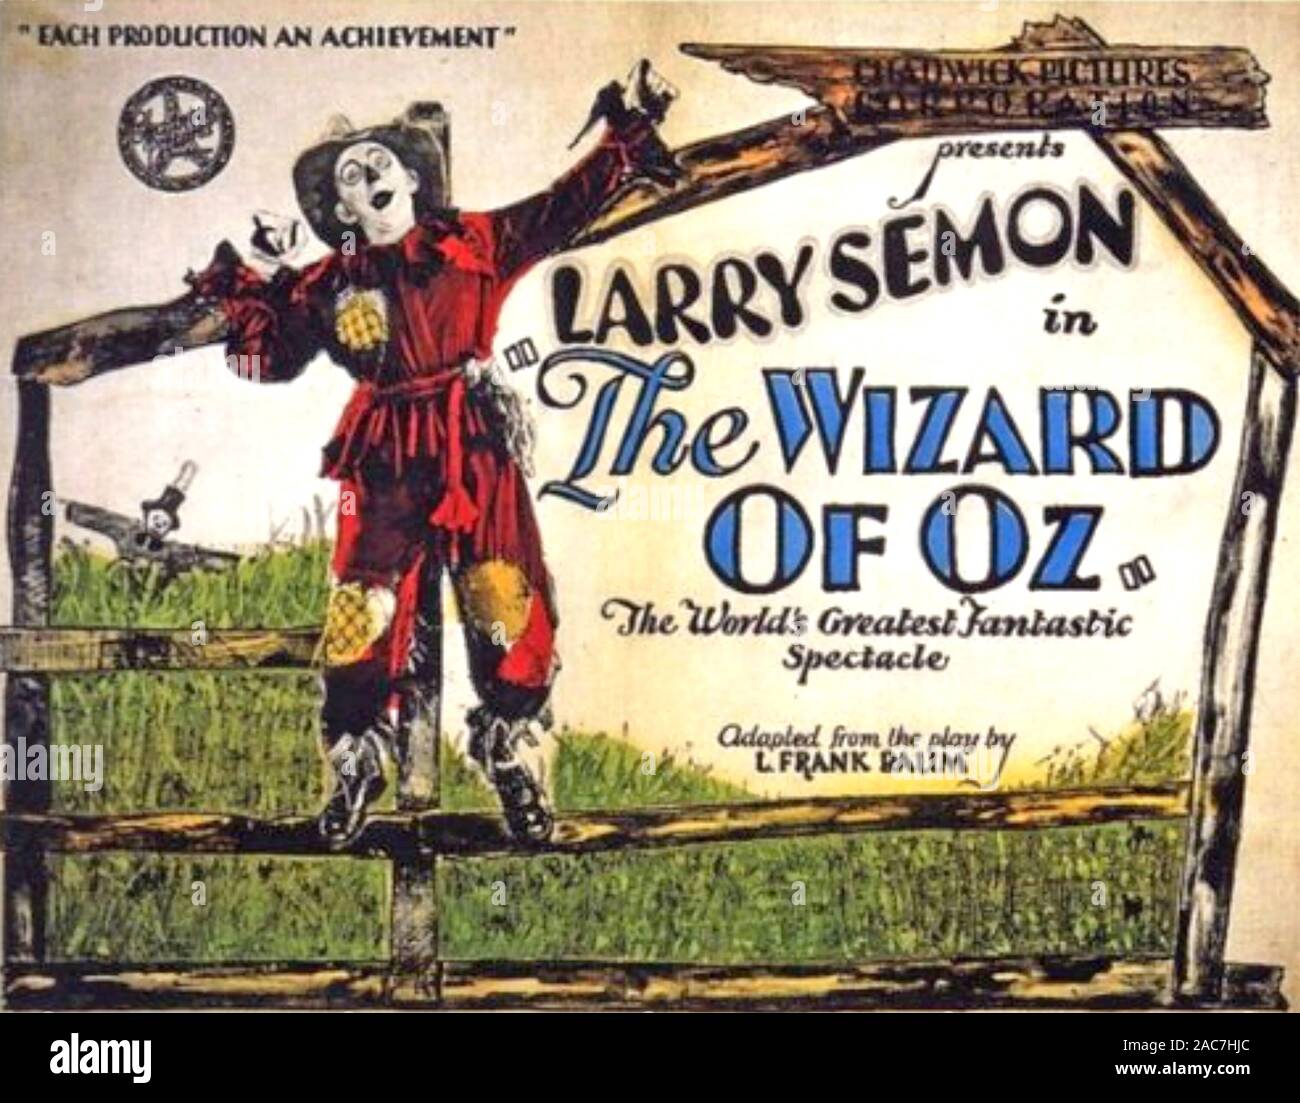 THE WIZARD OF OZ 1925 Chadwick Pictures film Banque D'Images